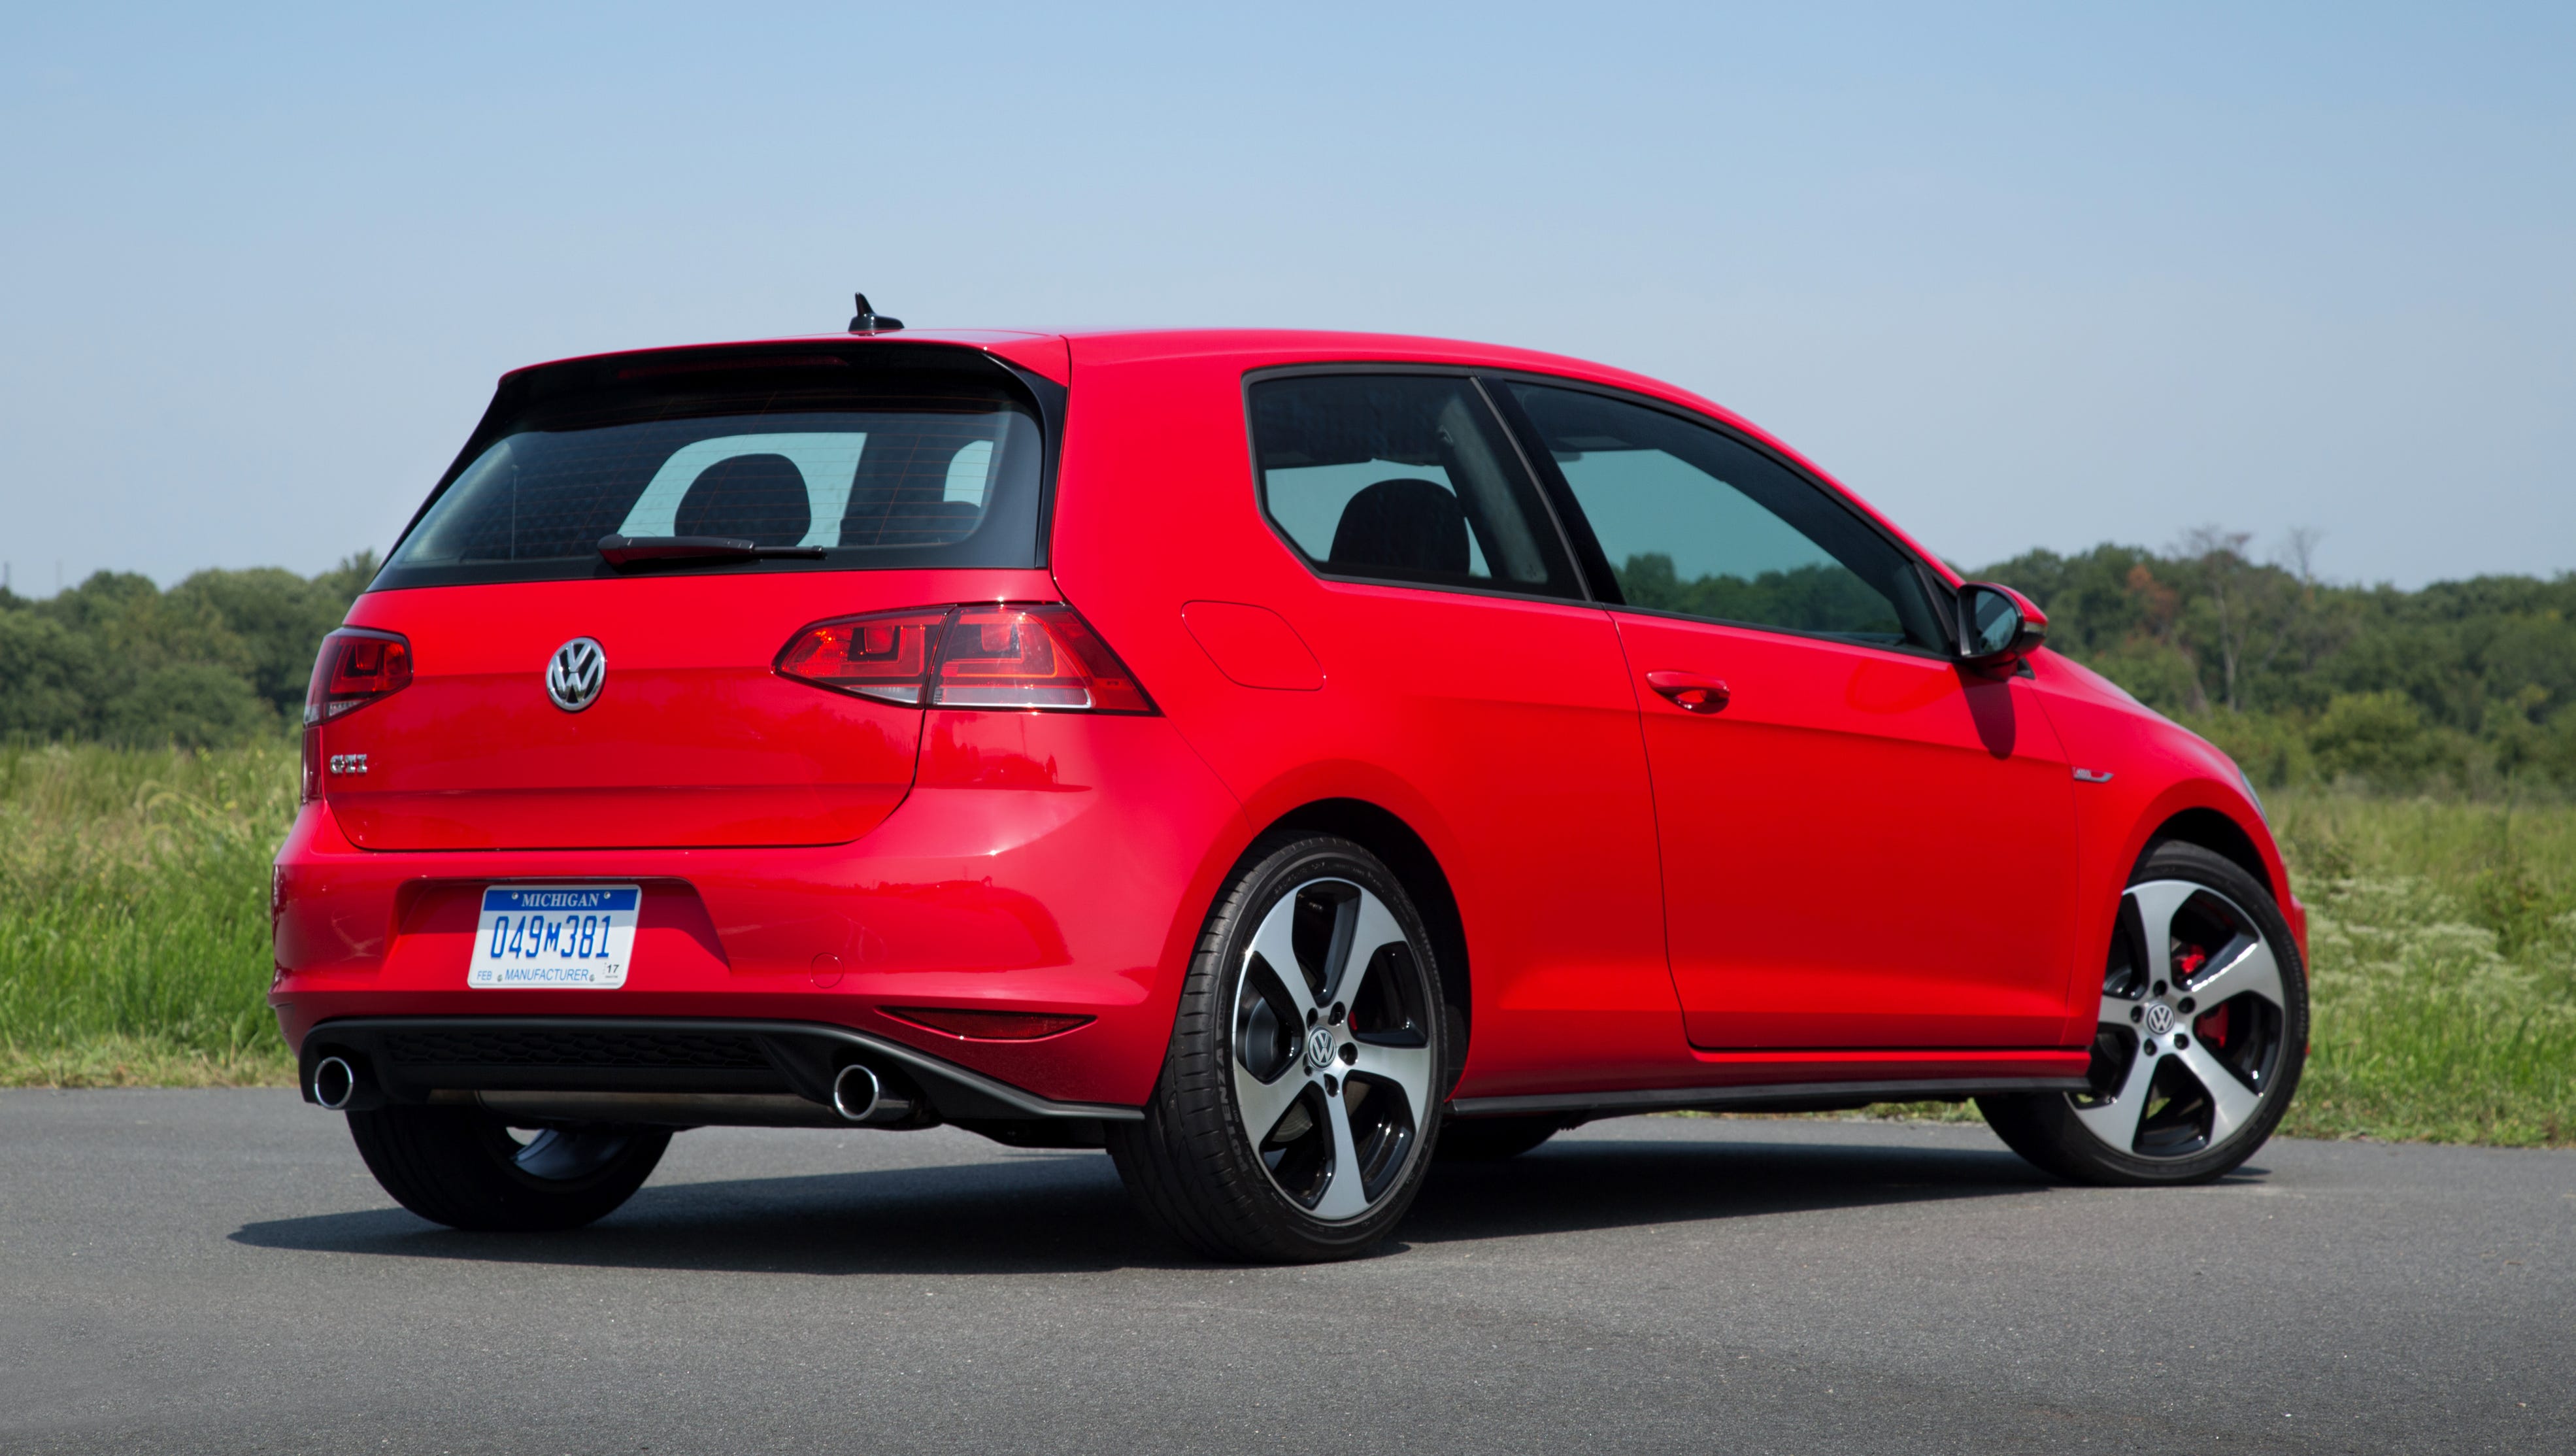 Auto review: 2015 Volkswagen Golf GTI worships at altar of the Autobahn